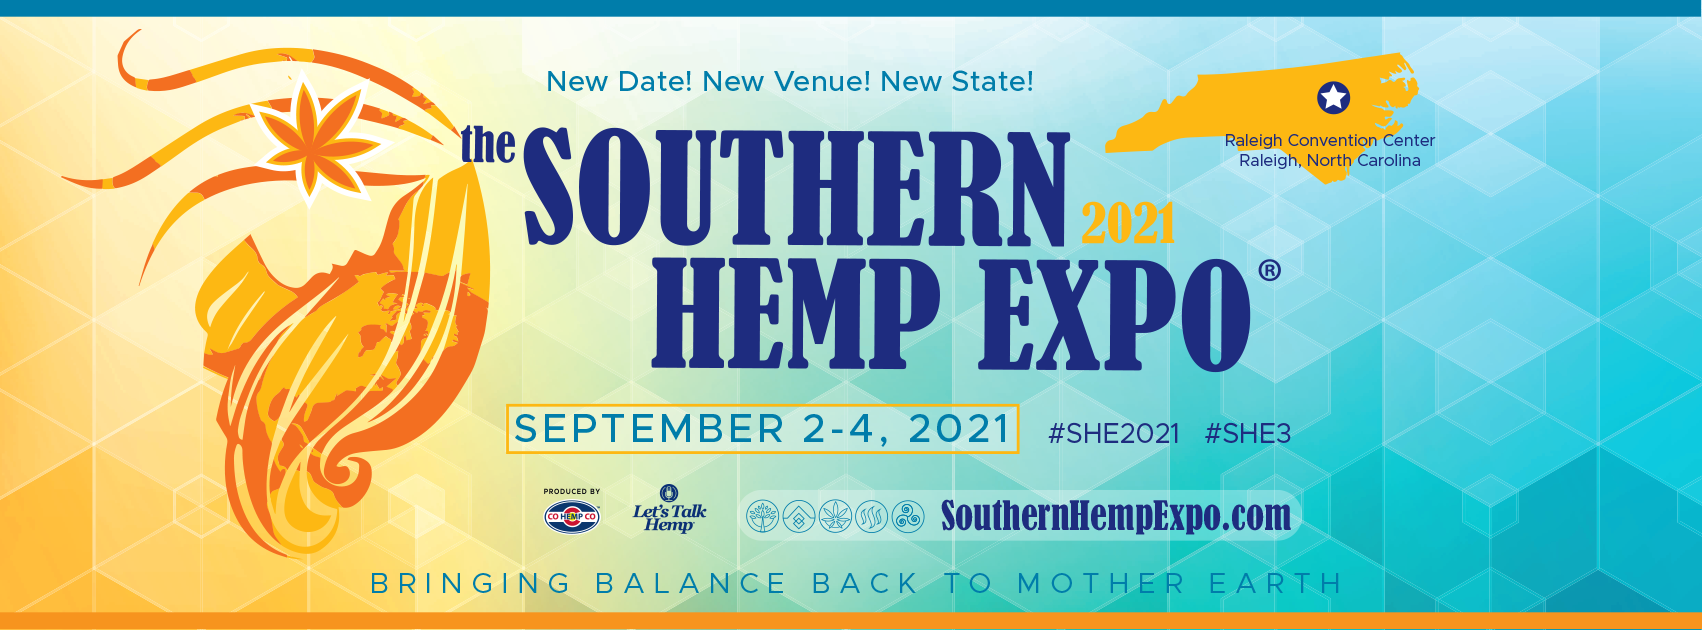 OP Innovates Team at Southern Hemp Expo 2021